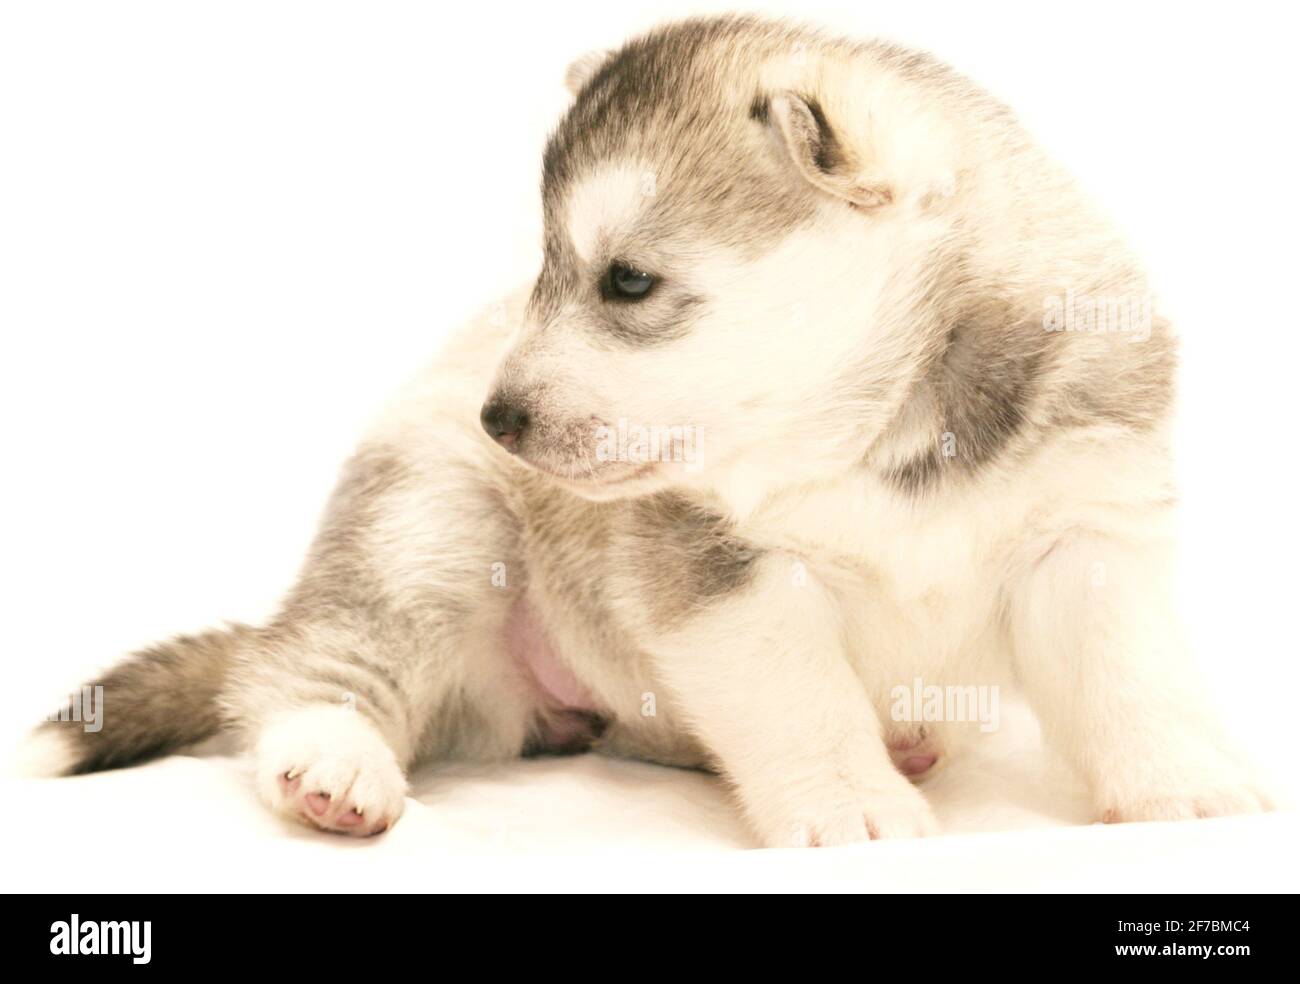 husky sibérien (Canis lupus F. familiaris), husky Puppy, Oestereich Banque D'Images